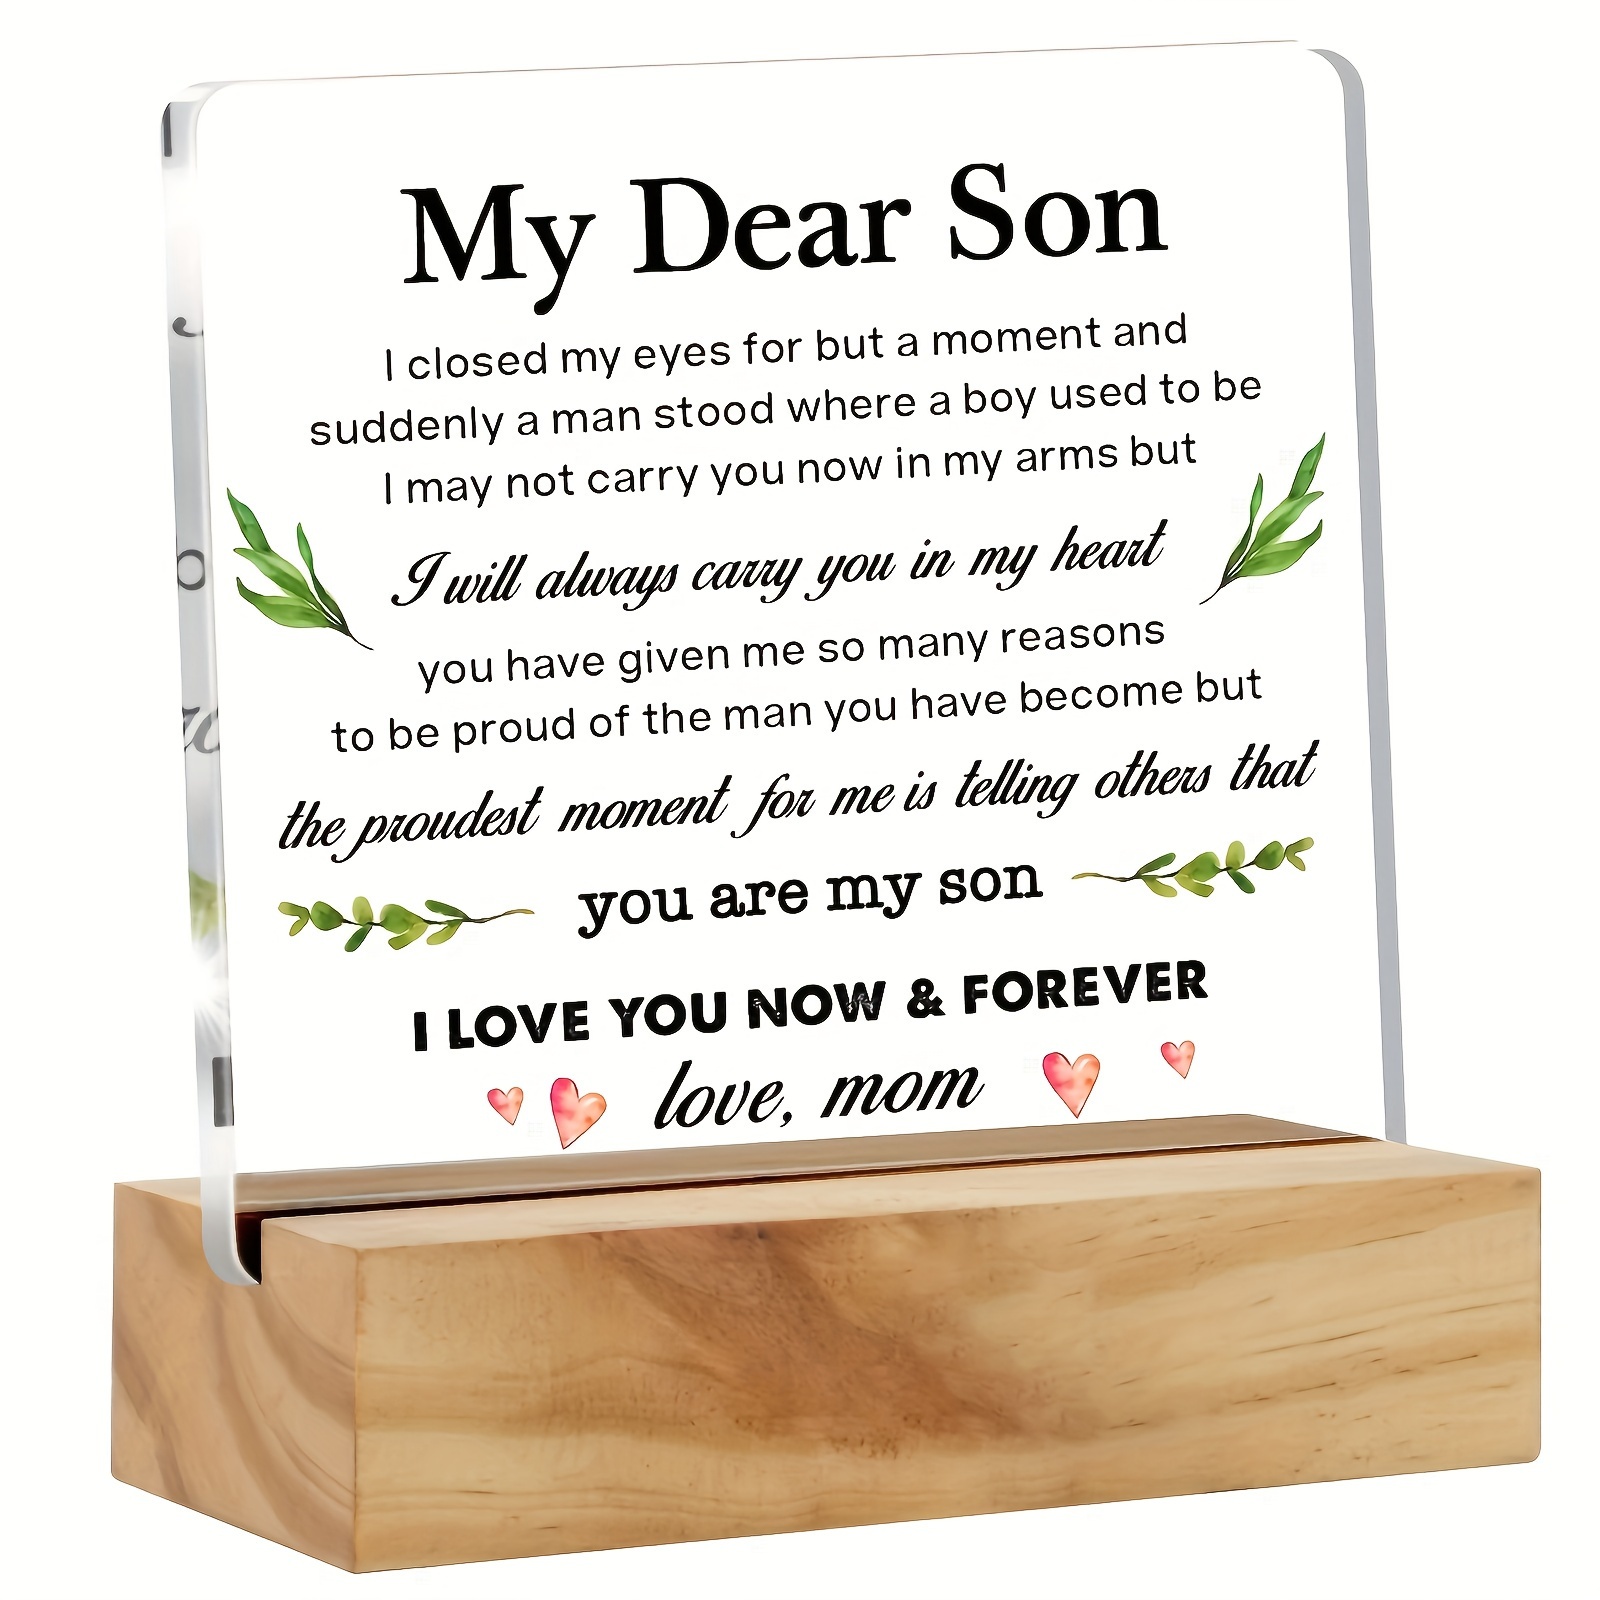 

1pc, Heartwarming Son Gift - "i Closed My Eyes For But A Moment" Acrylic Desk Plaque With Wood Stand - Meaningful Keepsake For Home & Office Décor - Perfect Present For Beloved Son